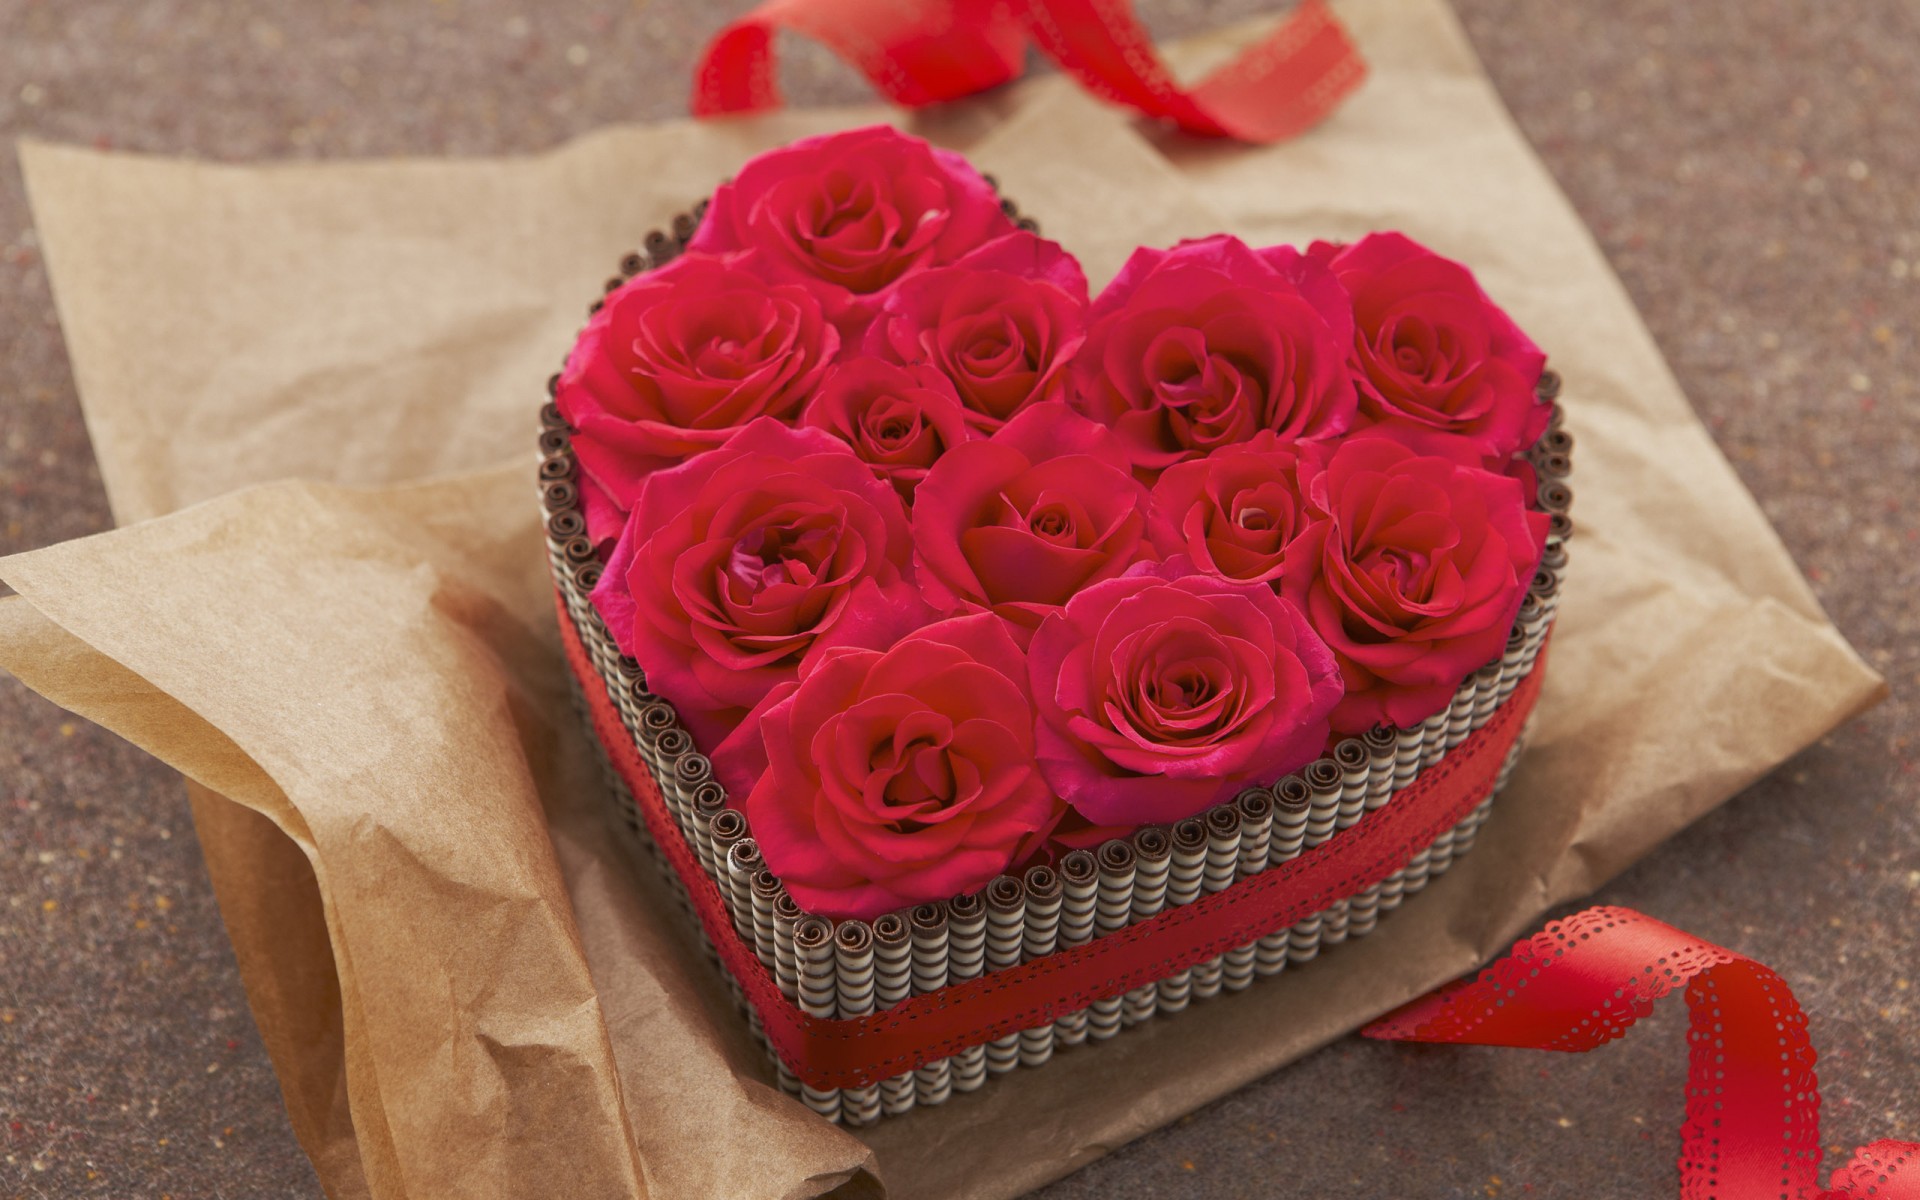 HD wallpaper love, photography, box, flower, heart, heart shaped, red rose, rose, valentine's day